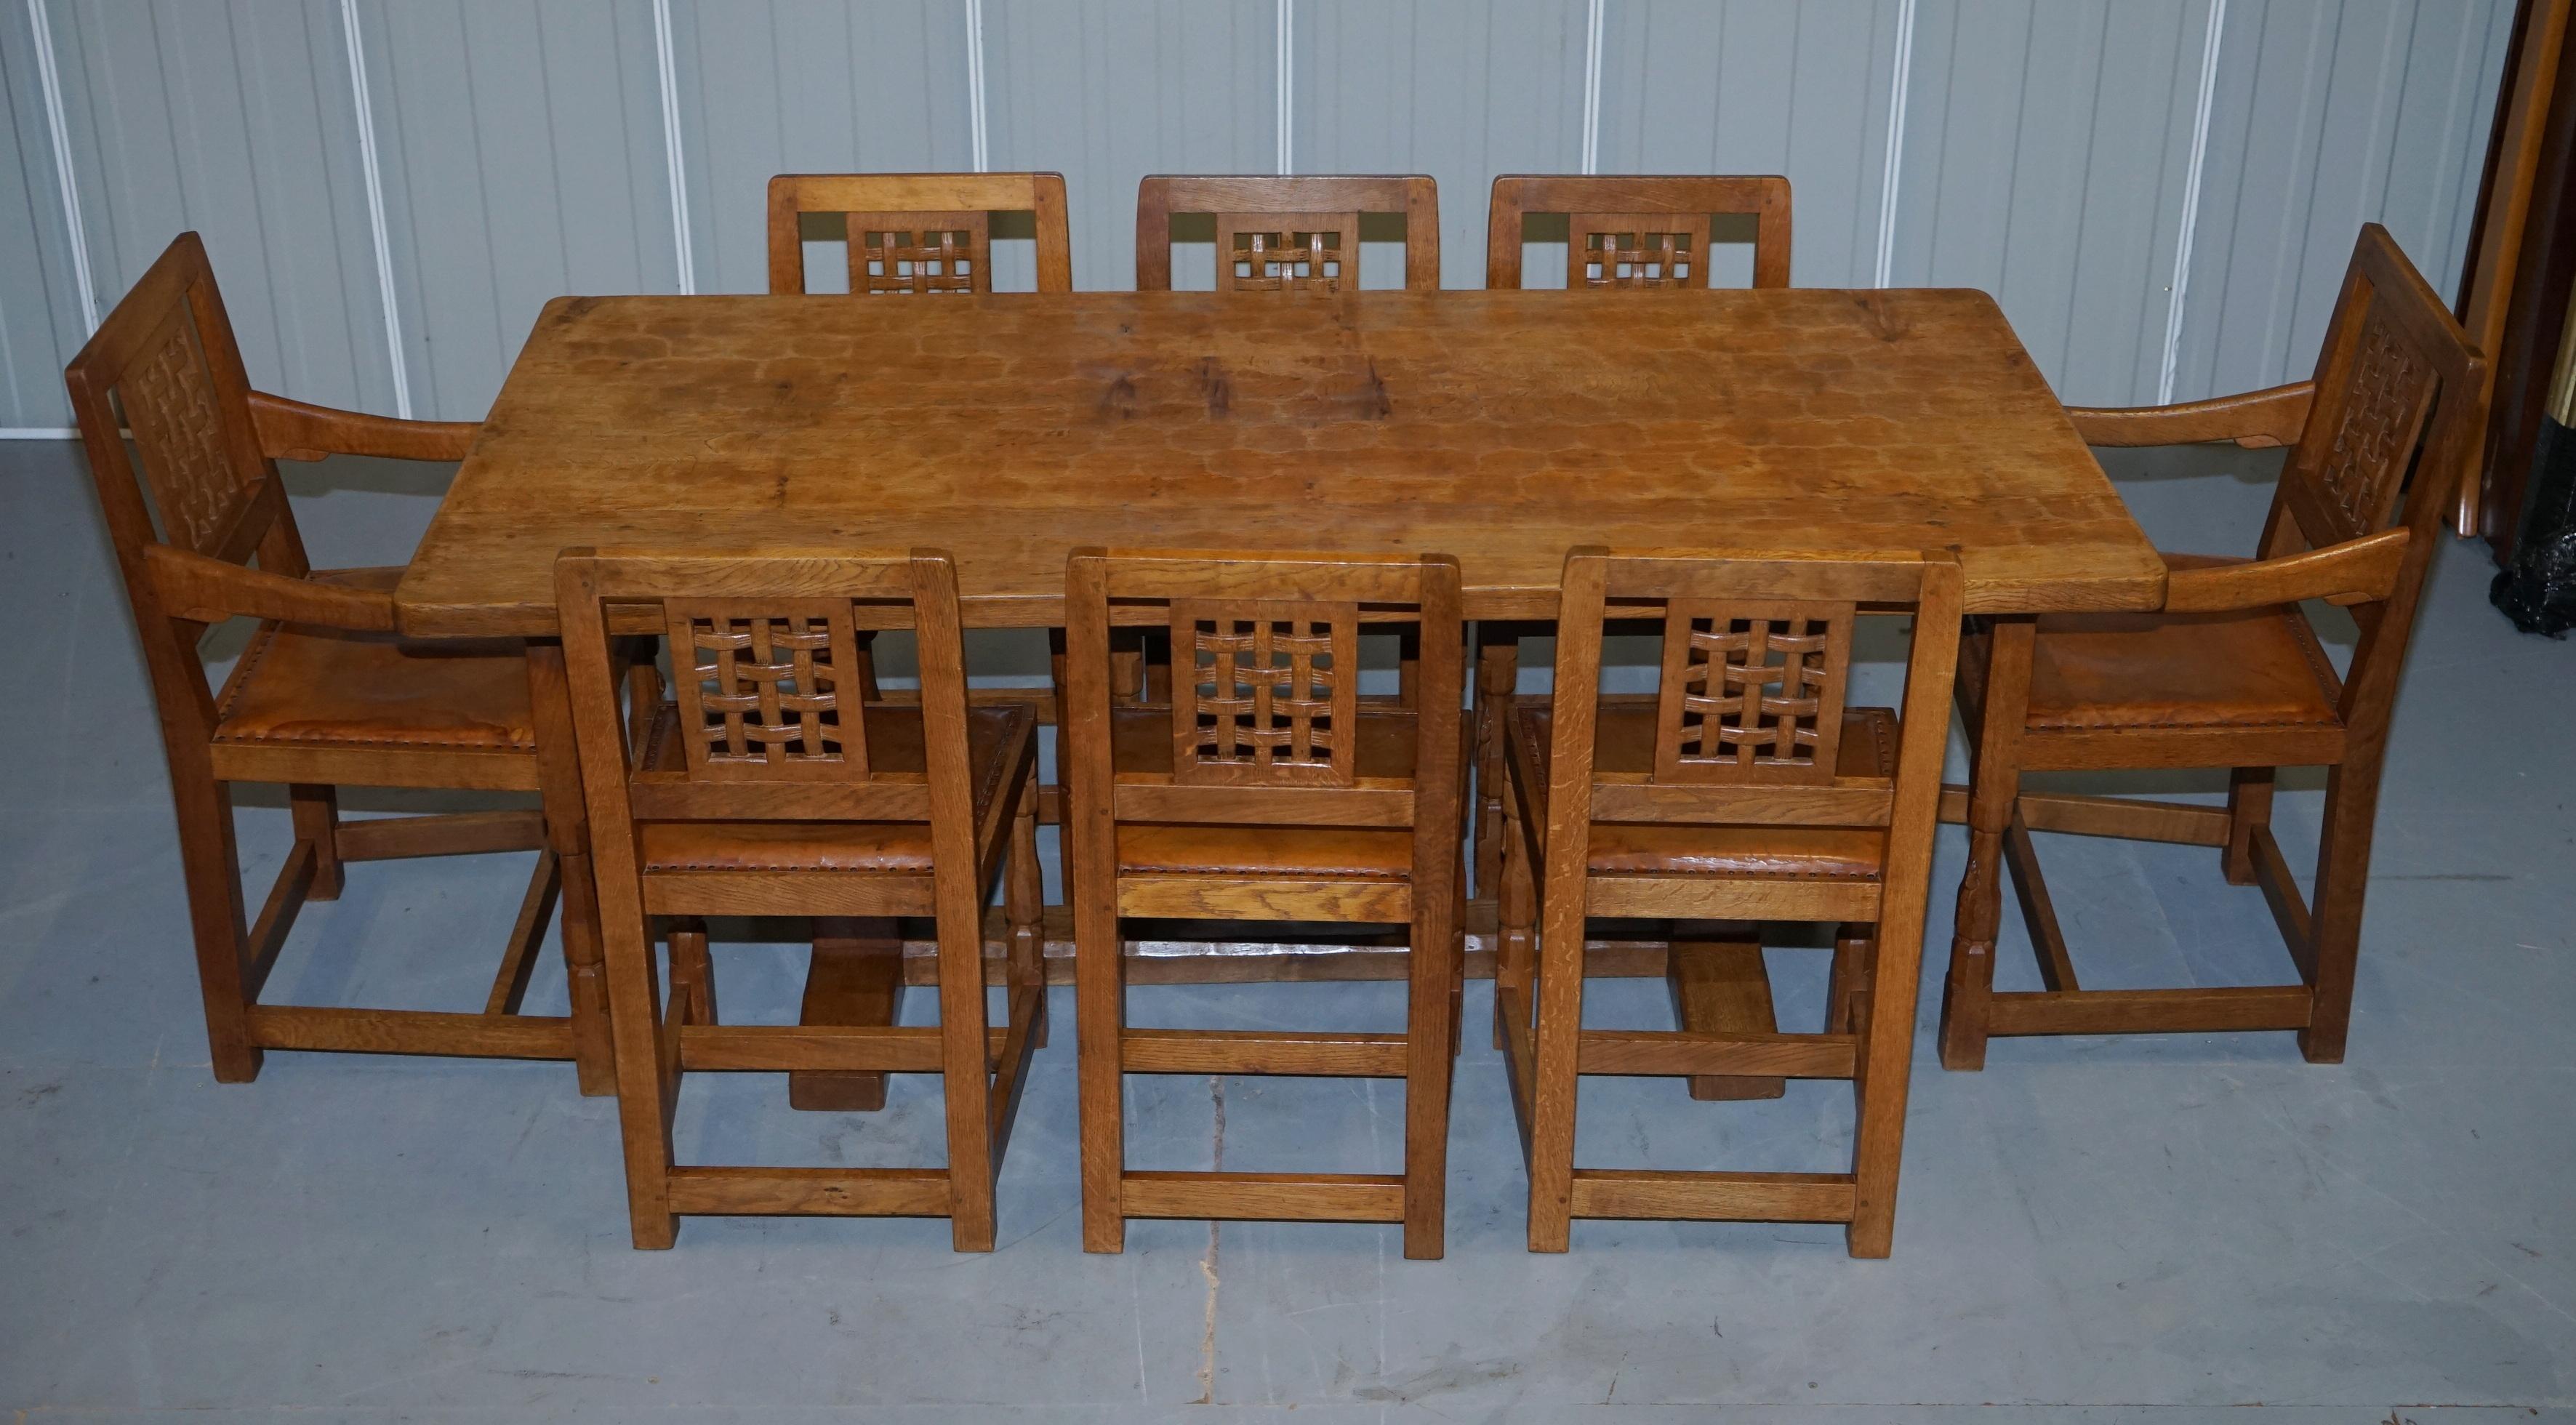 We are delighted to offer for sale this very collectable 1968 Robert Mouseman Thompson English oak refectory dining table and eight dining chairs which have a sublime patination

I have two suites of Mouseman chairs listed under my other items,